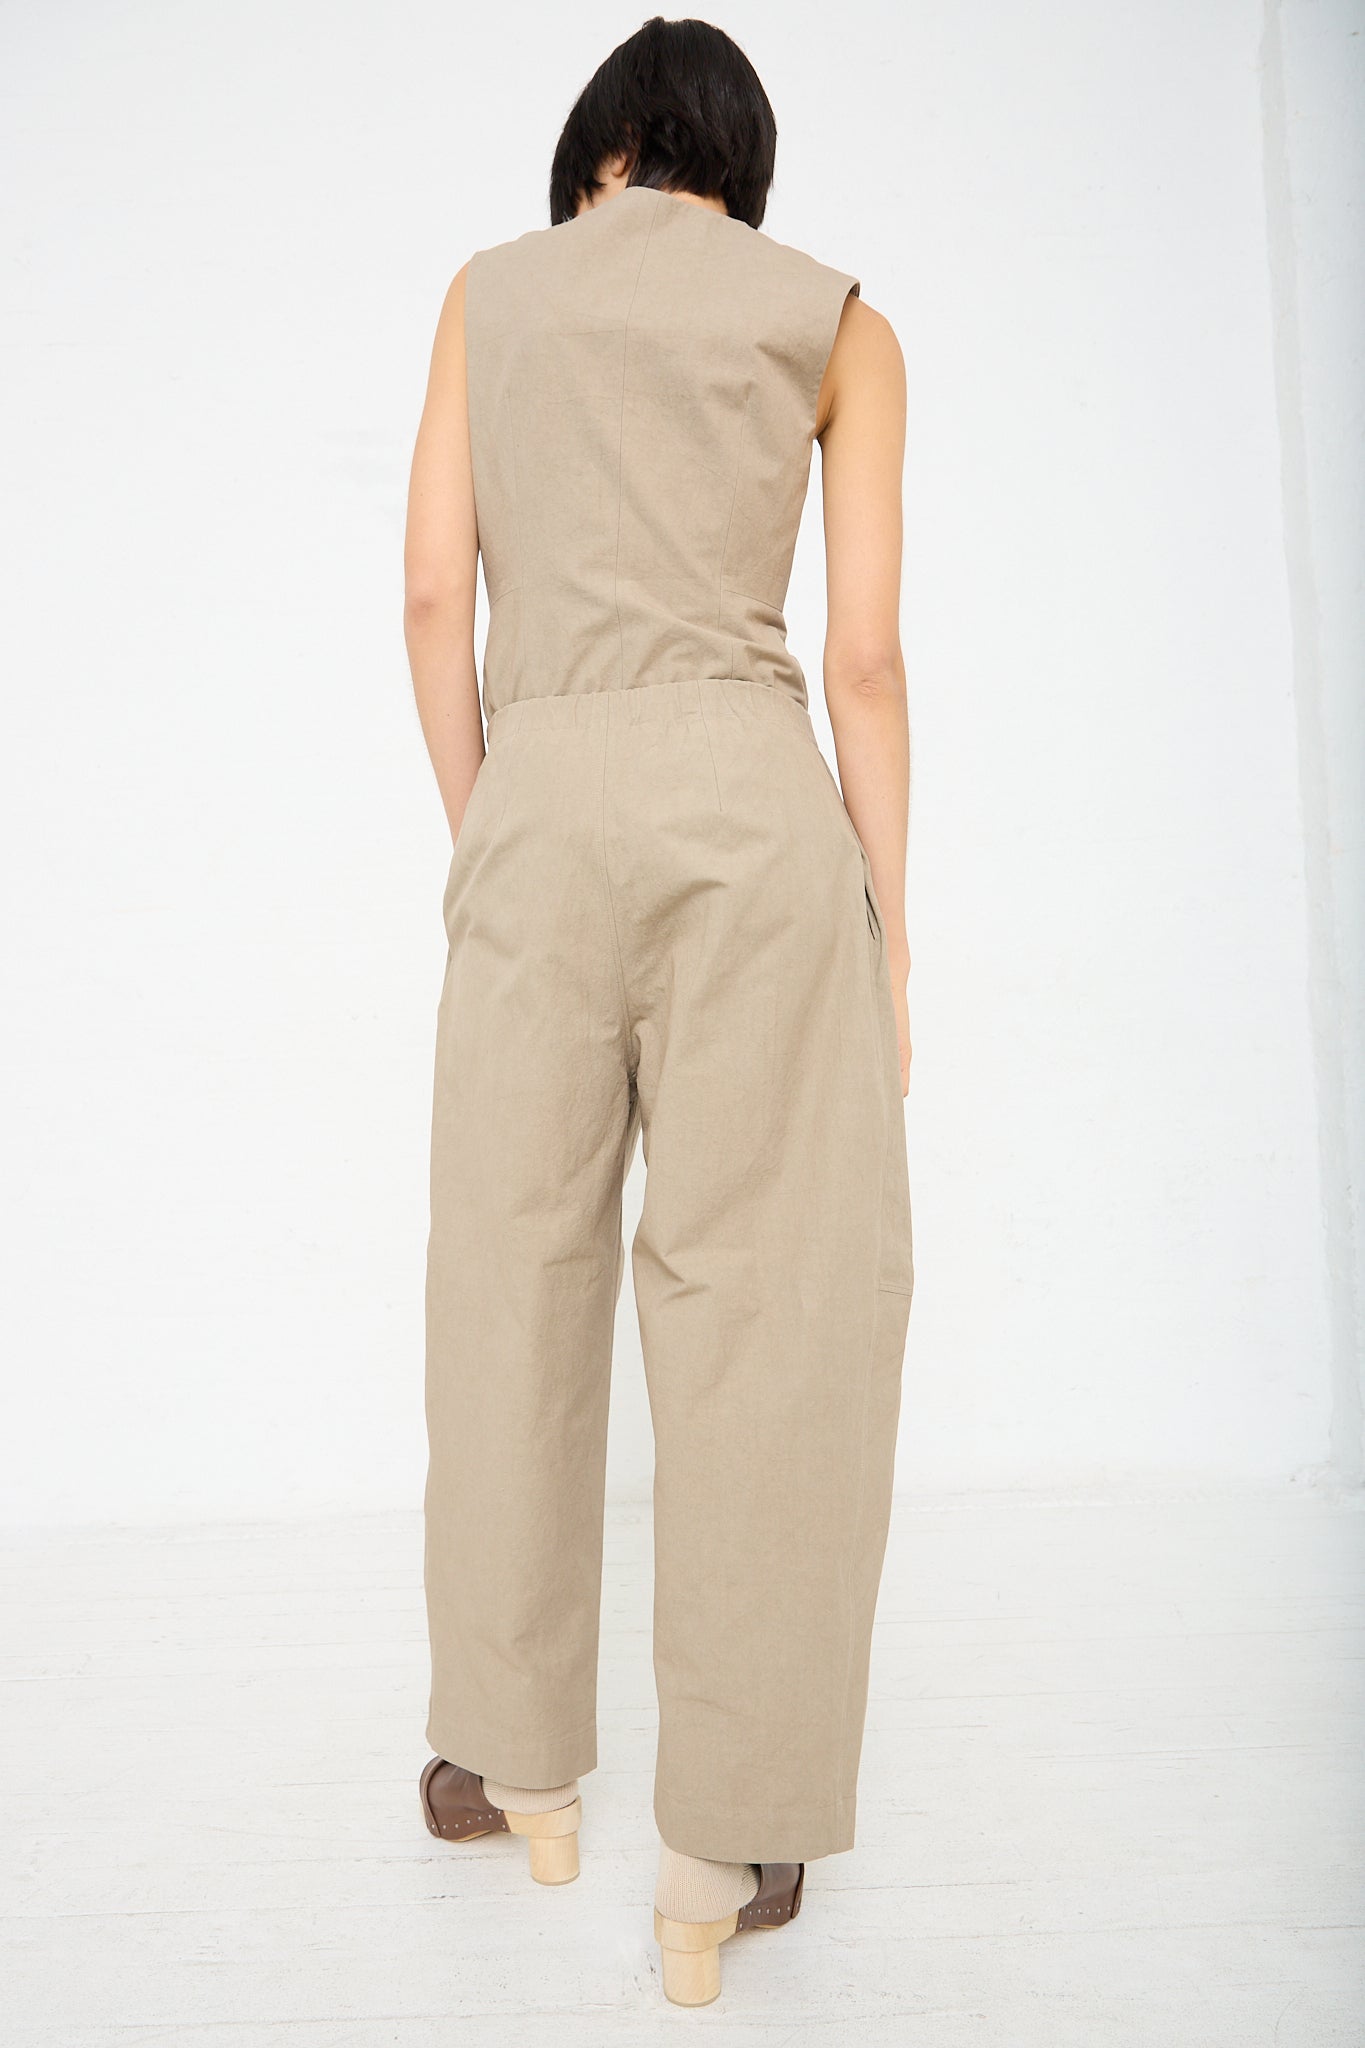 The back view of a woman in a relaxed fit New Structure Pant in Drab (Olive Brown) with an elasticated waist by Lauren Manoogian. The model is wearing a matching top. Full length.